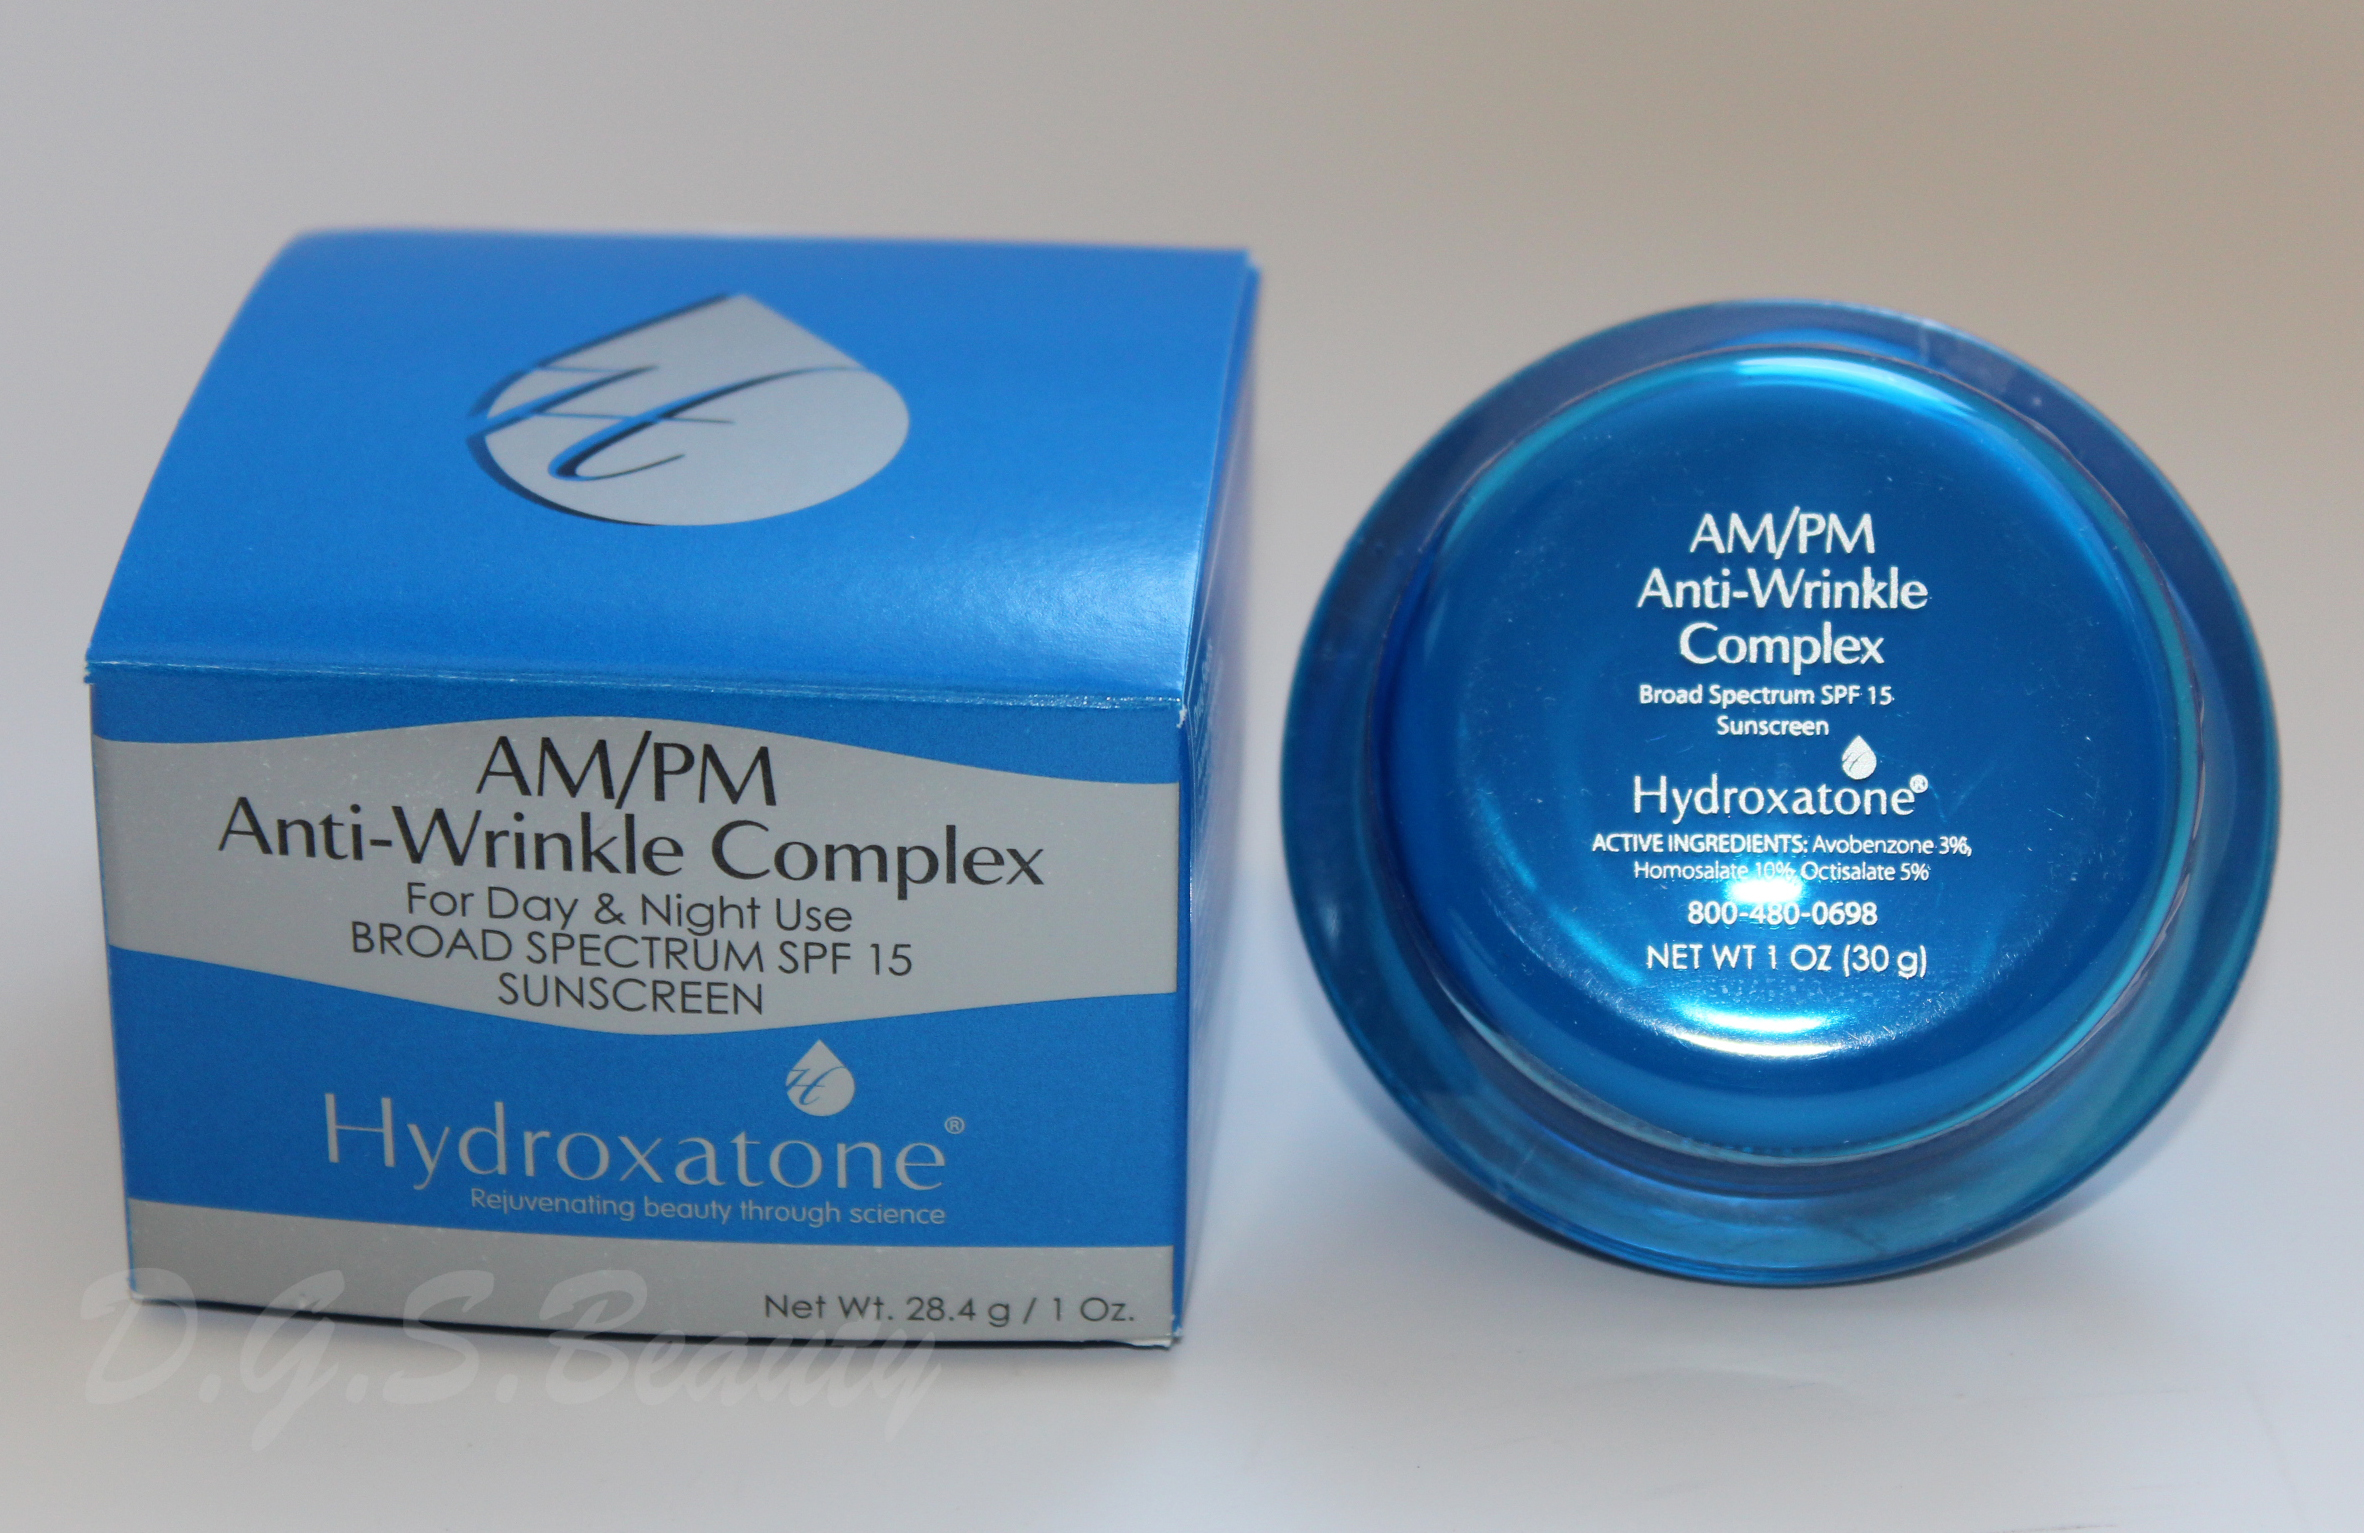 Hydroxatone AM/PM Anti-Wrinkle Complex Review